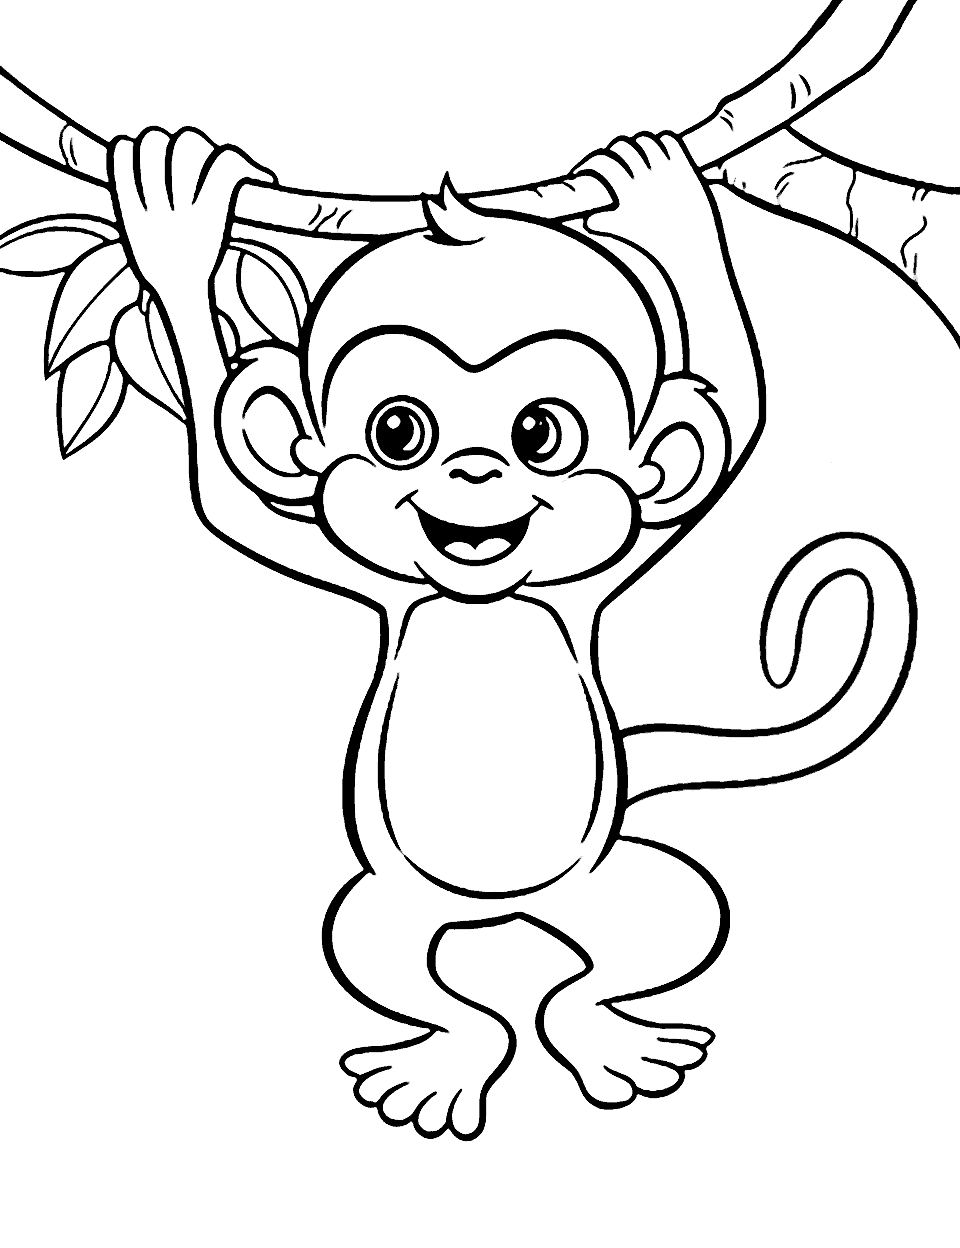 Playful Monkey Hanging Animal Coloring Page - A monkey swinging from branch to branch, showing off its agility.